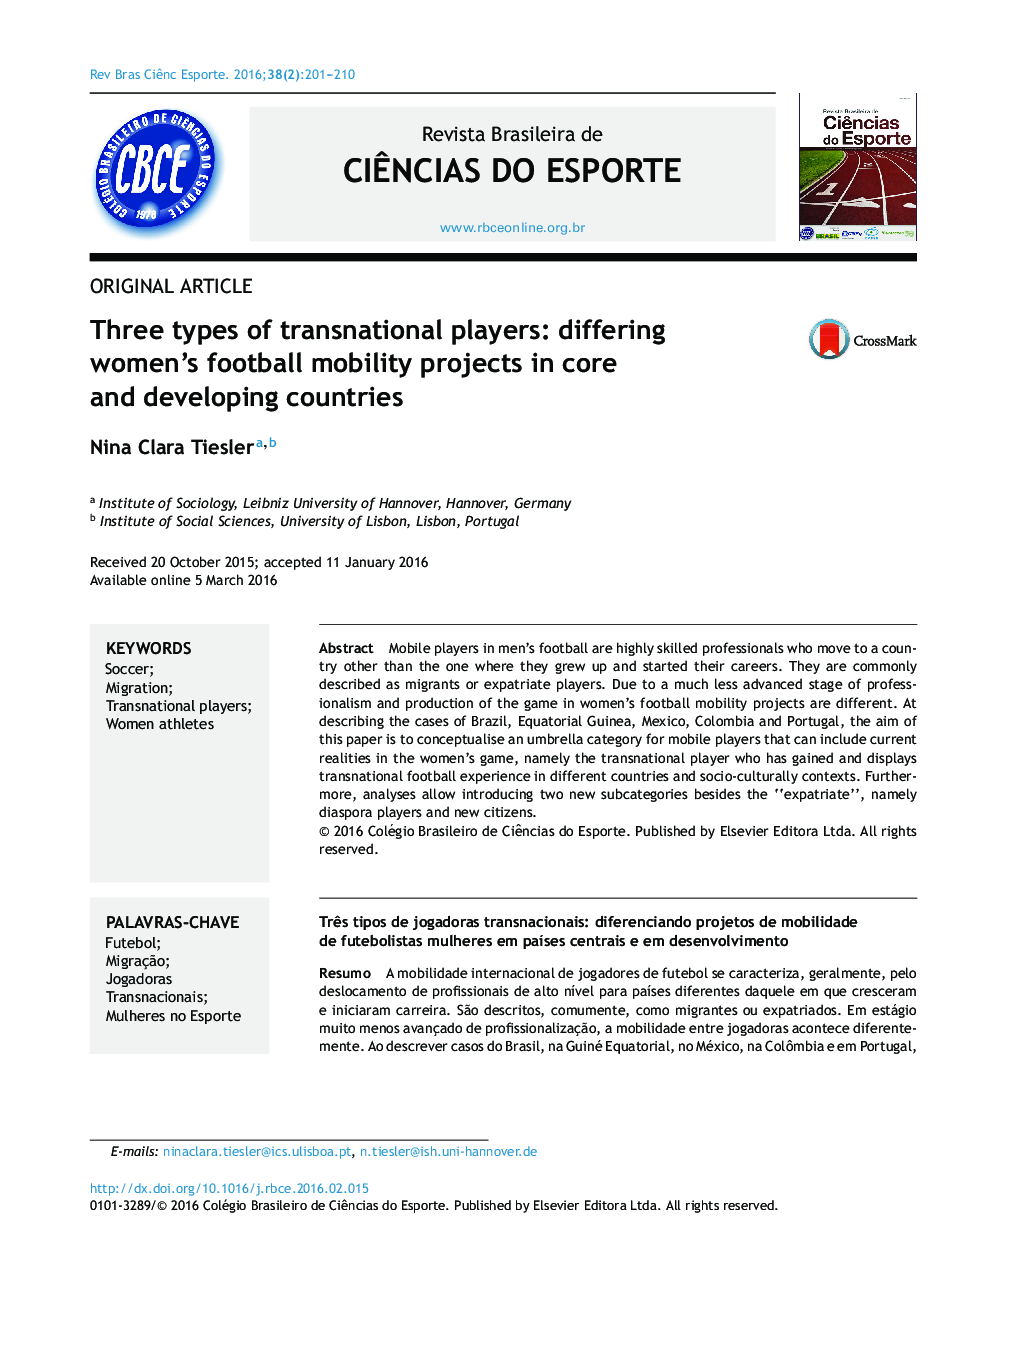 Three types of transnational players: differing women's football mobility projects in core and developing countries